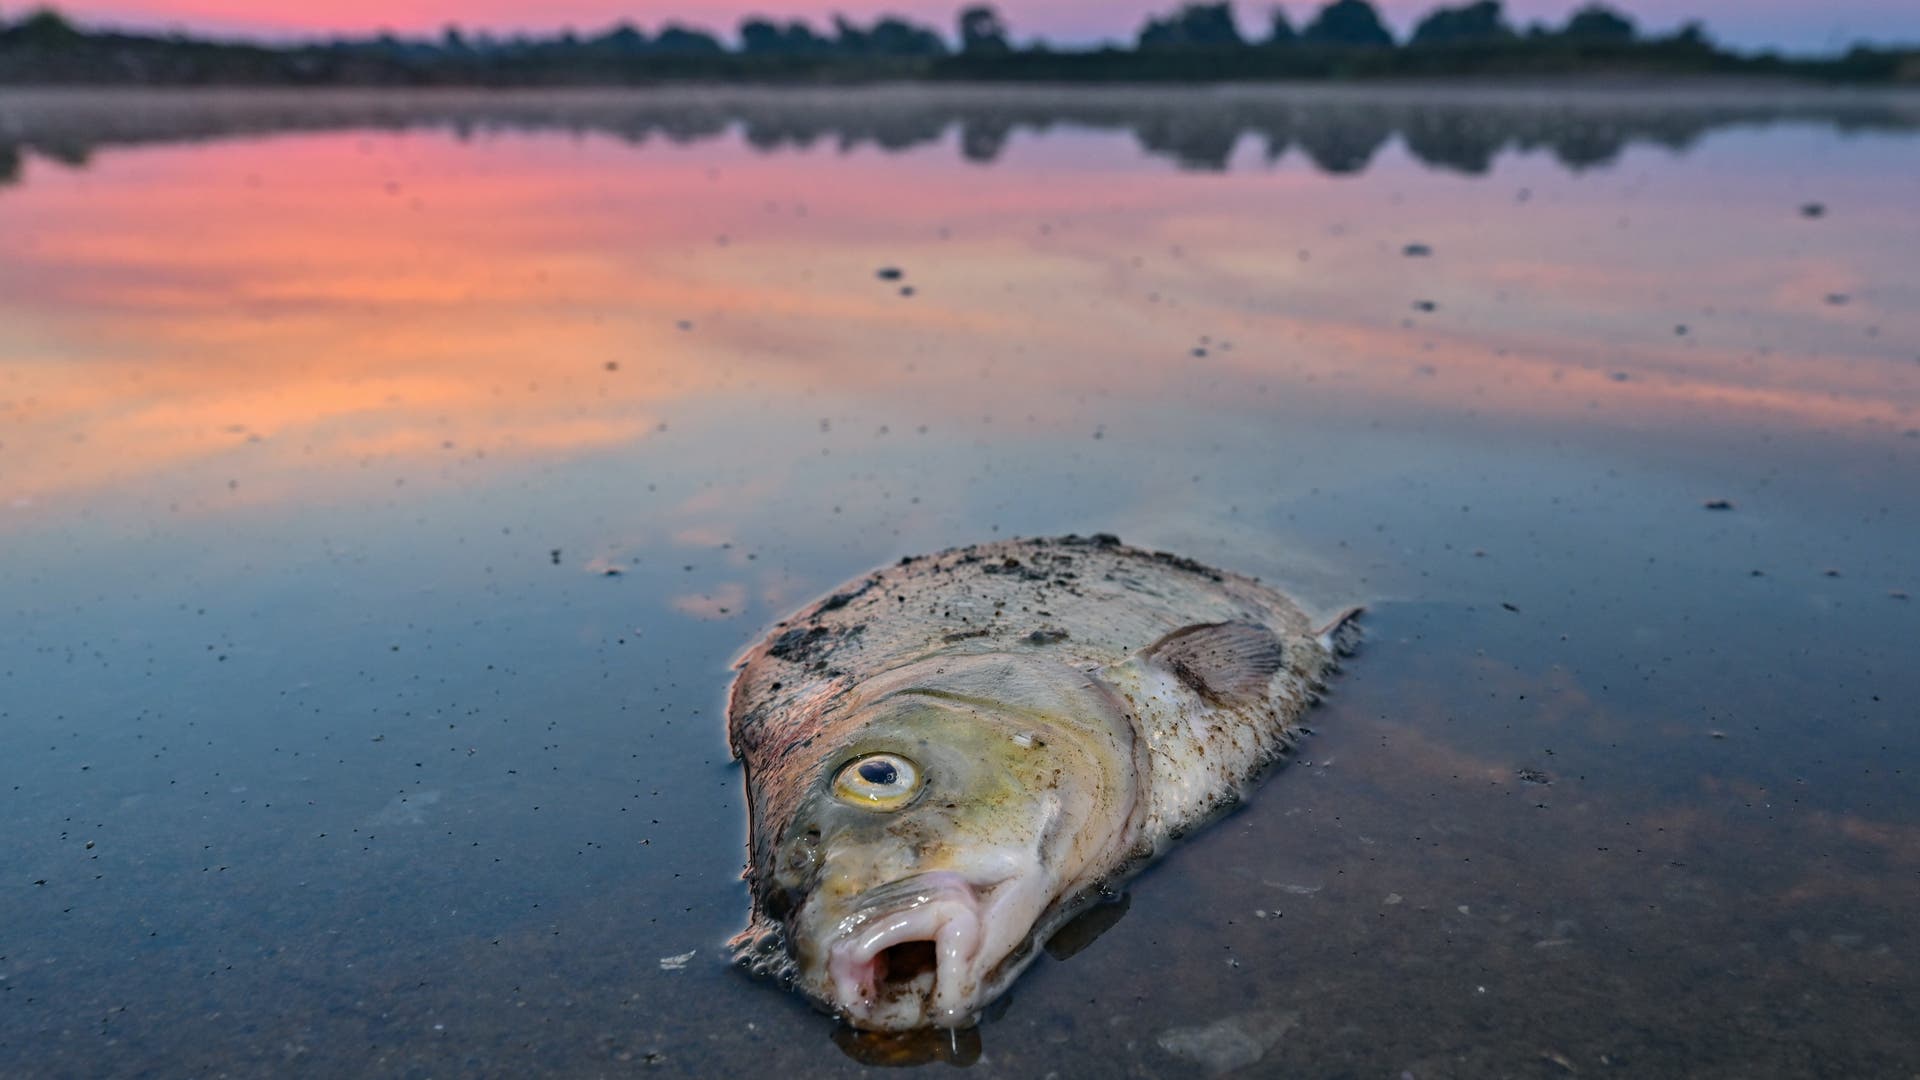 Killing fish: Researchers discover algal toxins in water samples from Oder